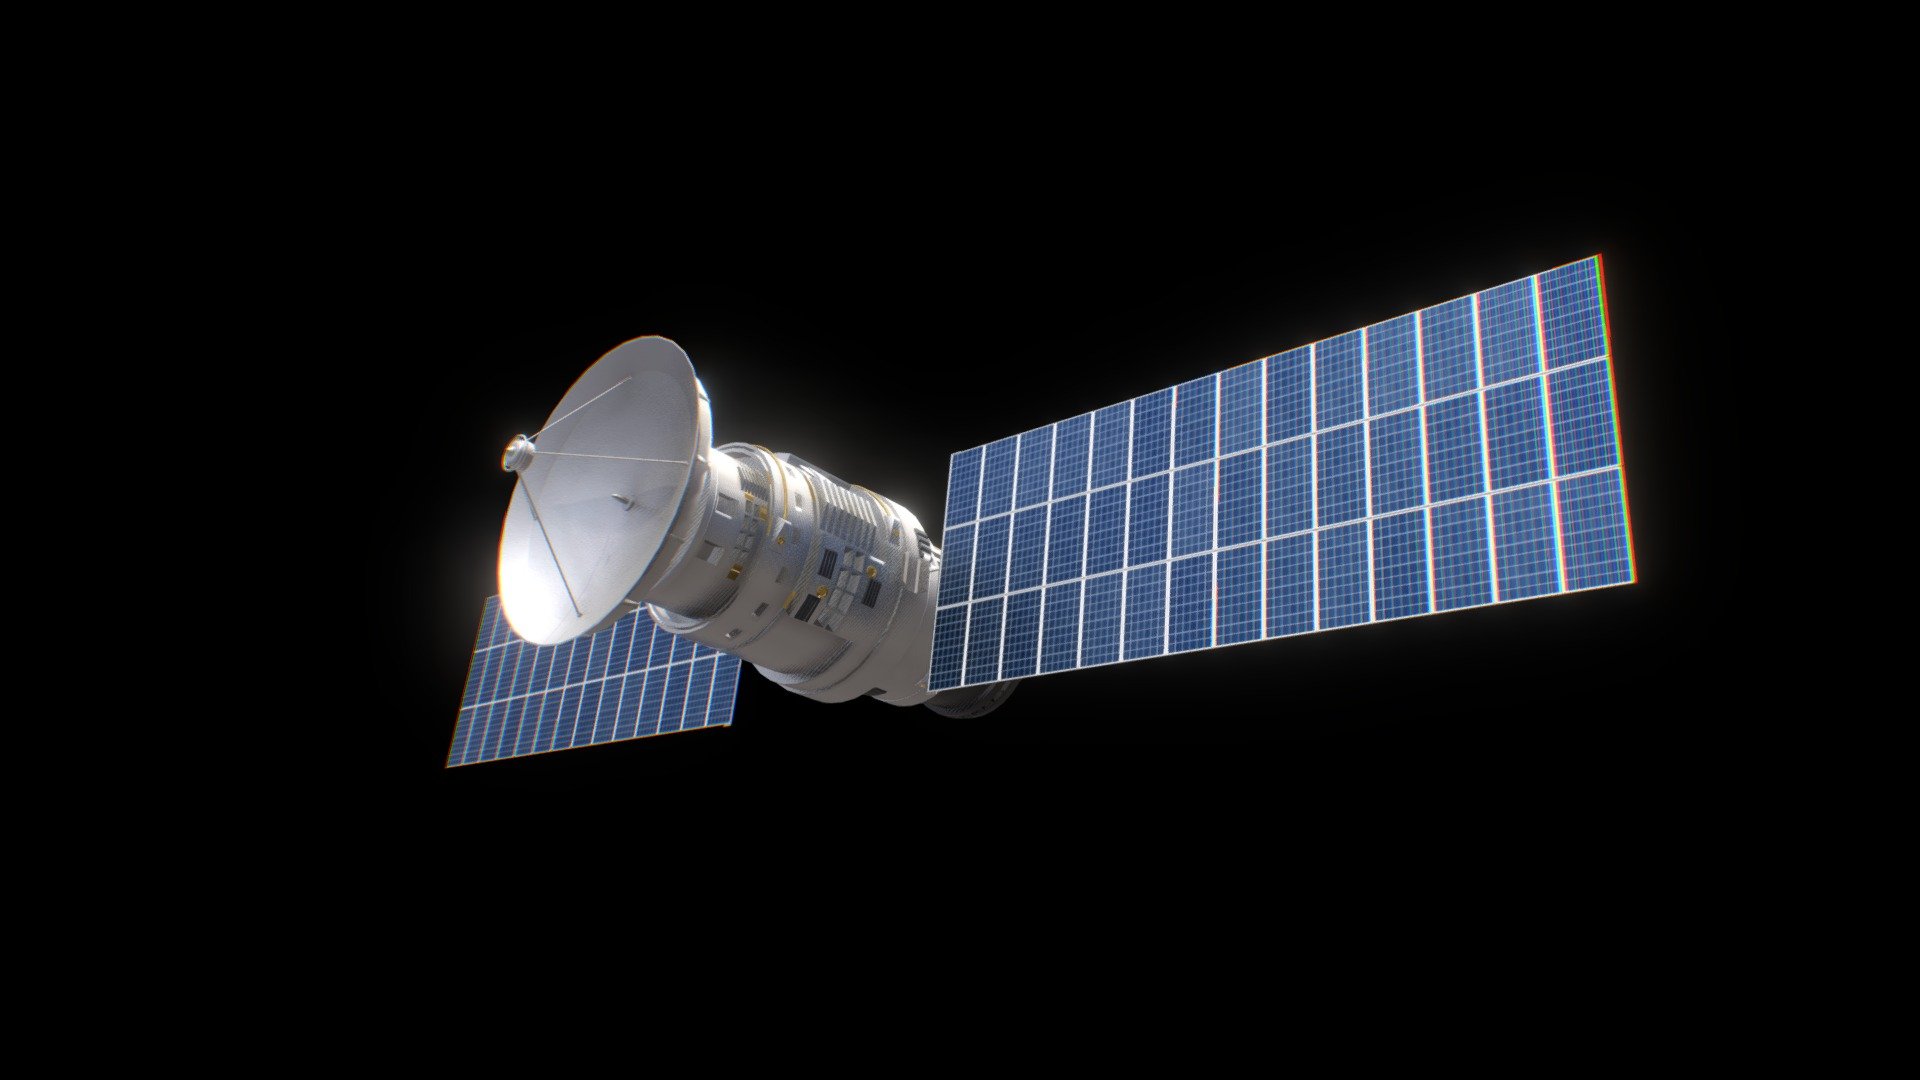 A fairly simple satellite to add to your sci-fi scene 3d model